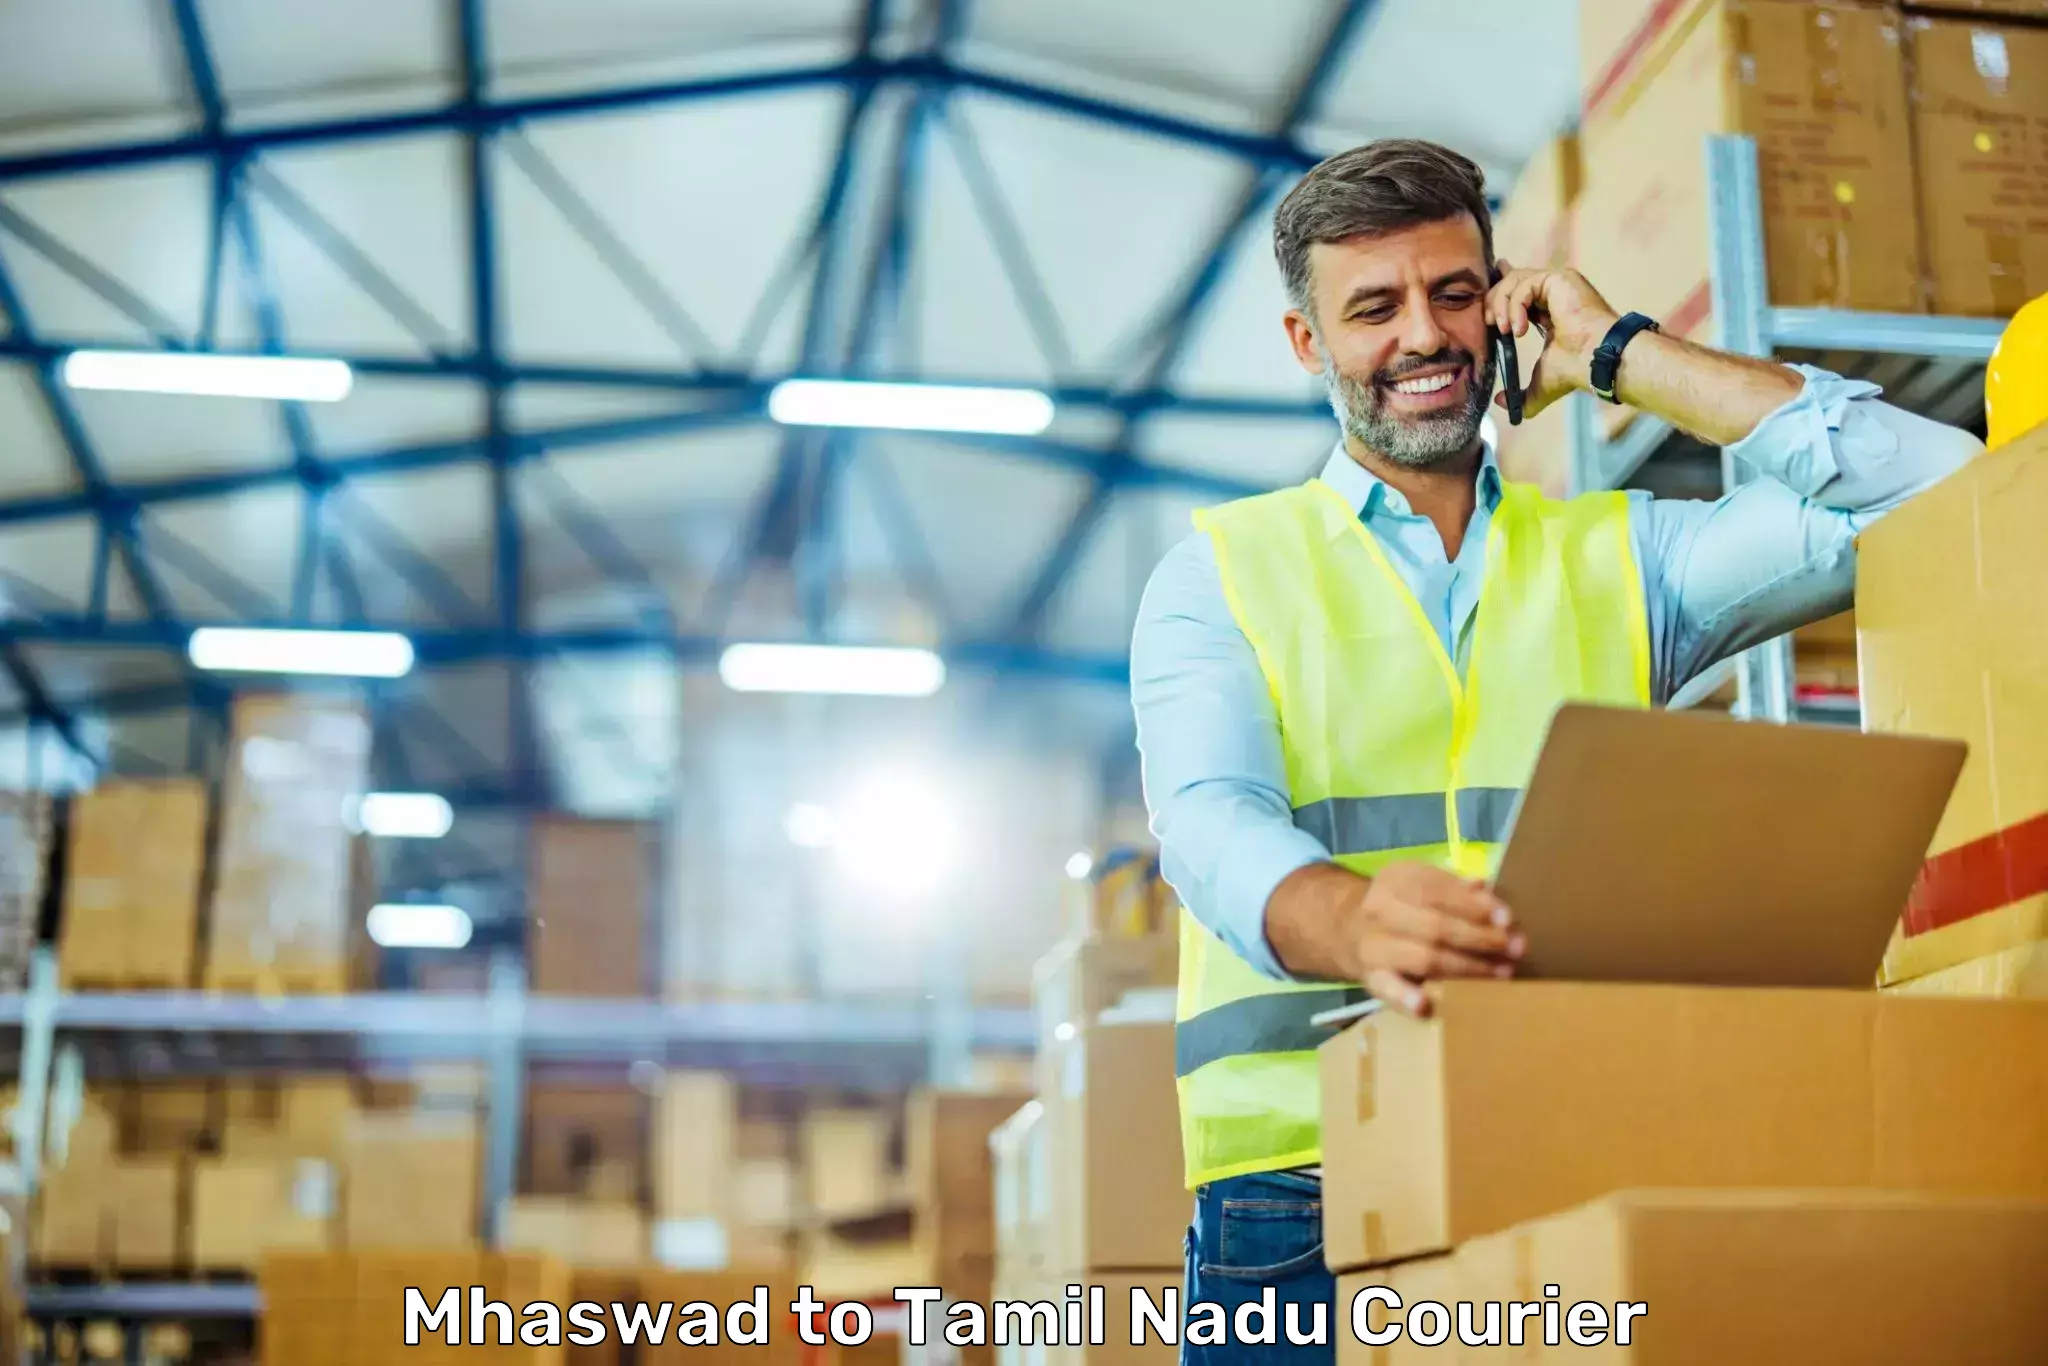 Courier service booking in Mhaswad to Mettur